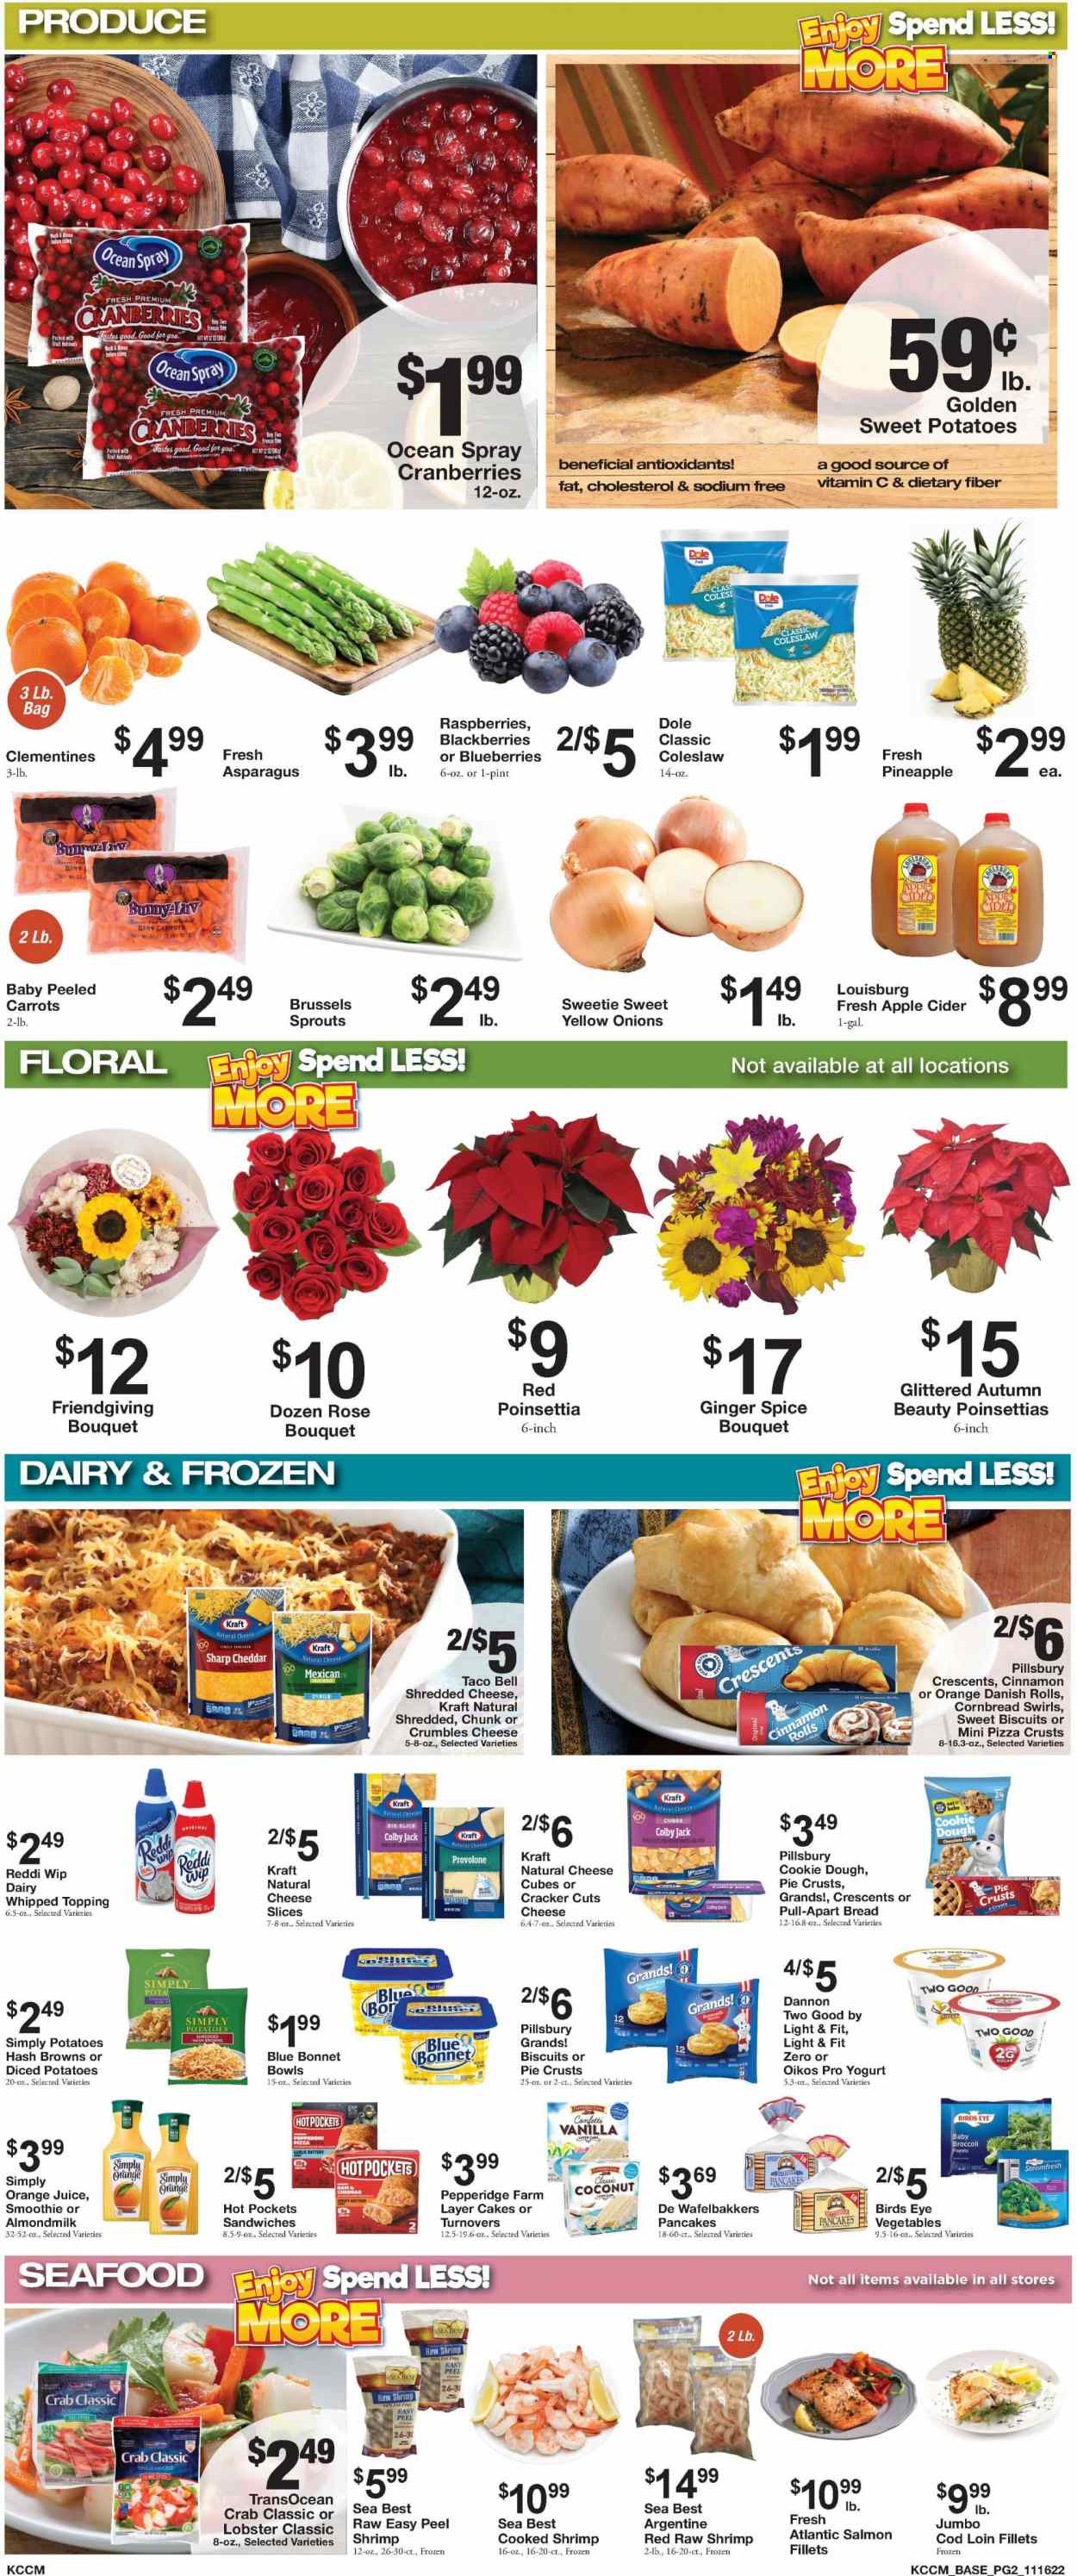 thumbnail - Bratchers Market Flyer - 11/16/2022 - 11/29/2022 - Sales products - bread, pie, corn bread, turnovers, cinnamon roll, asparagus, broccoli, carrots, garlic, ginger, sweet potato, potatoes, onion, Dole, brussel sprouts, blackberries, blueberries, pineapple, coconut, cod, lobster, salmon, salmon fillet, seafood, crab, shrimps, coleslaw, hot pocket, pizza, sandwich, pancakes, Pillsbury, Bird's Eye, Kraft®, pepperoni, Colby cheese, shredded cheese, sliced cheese, cheddar, Provolone, yoghurt, Oikos, Dannon, almond milk, buttermilk, hash browns, cookie dough, chocolate chips, crackers, biscuit, pie crust, topping, cranberries, spice, orange juice, juice, smoothie, wine, rosé wine, apple cider, cider, poinsettia, bouquet, rose, vitamin c, clementines. Page 2.